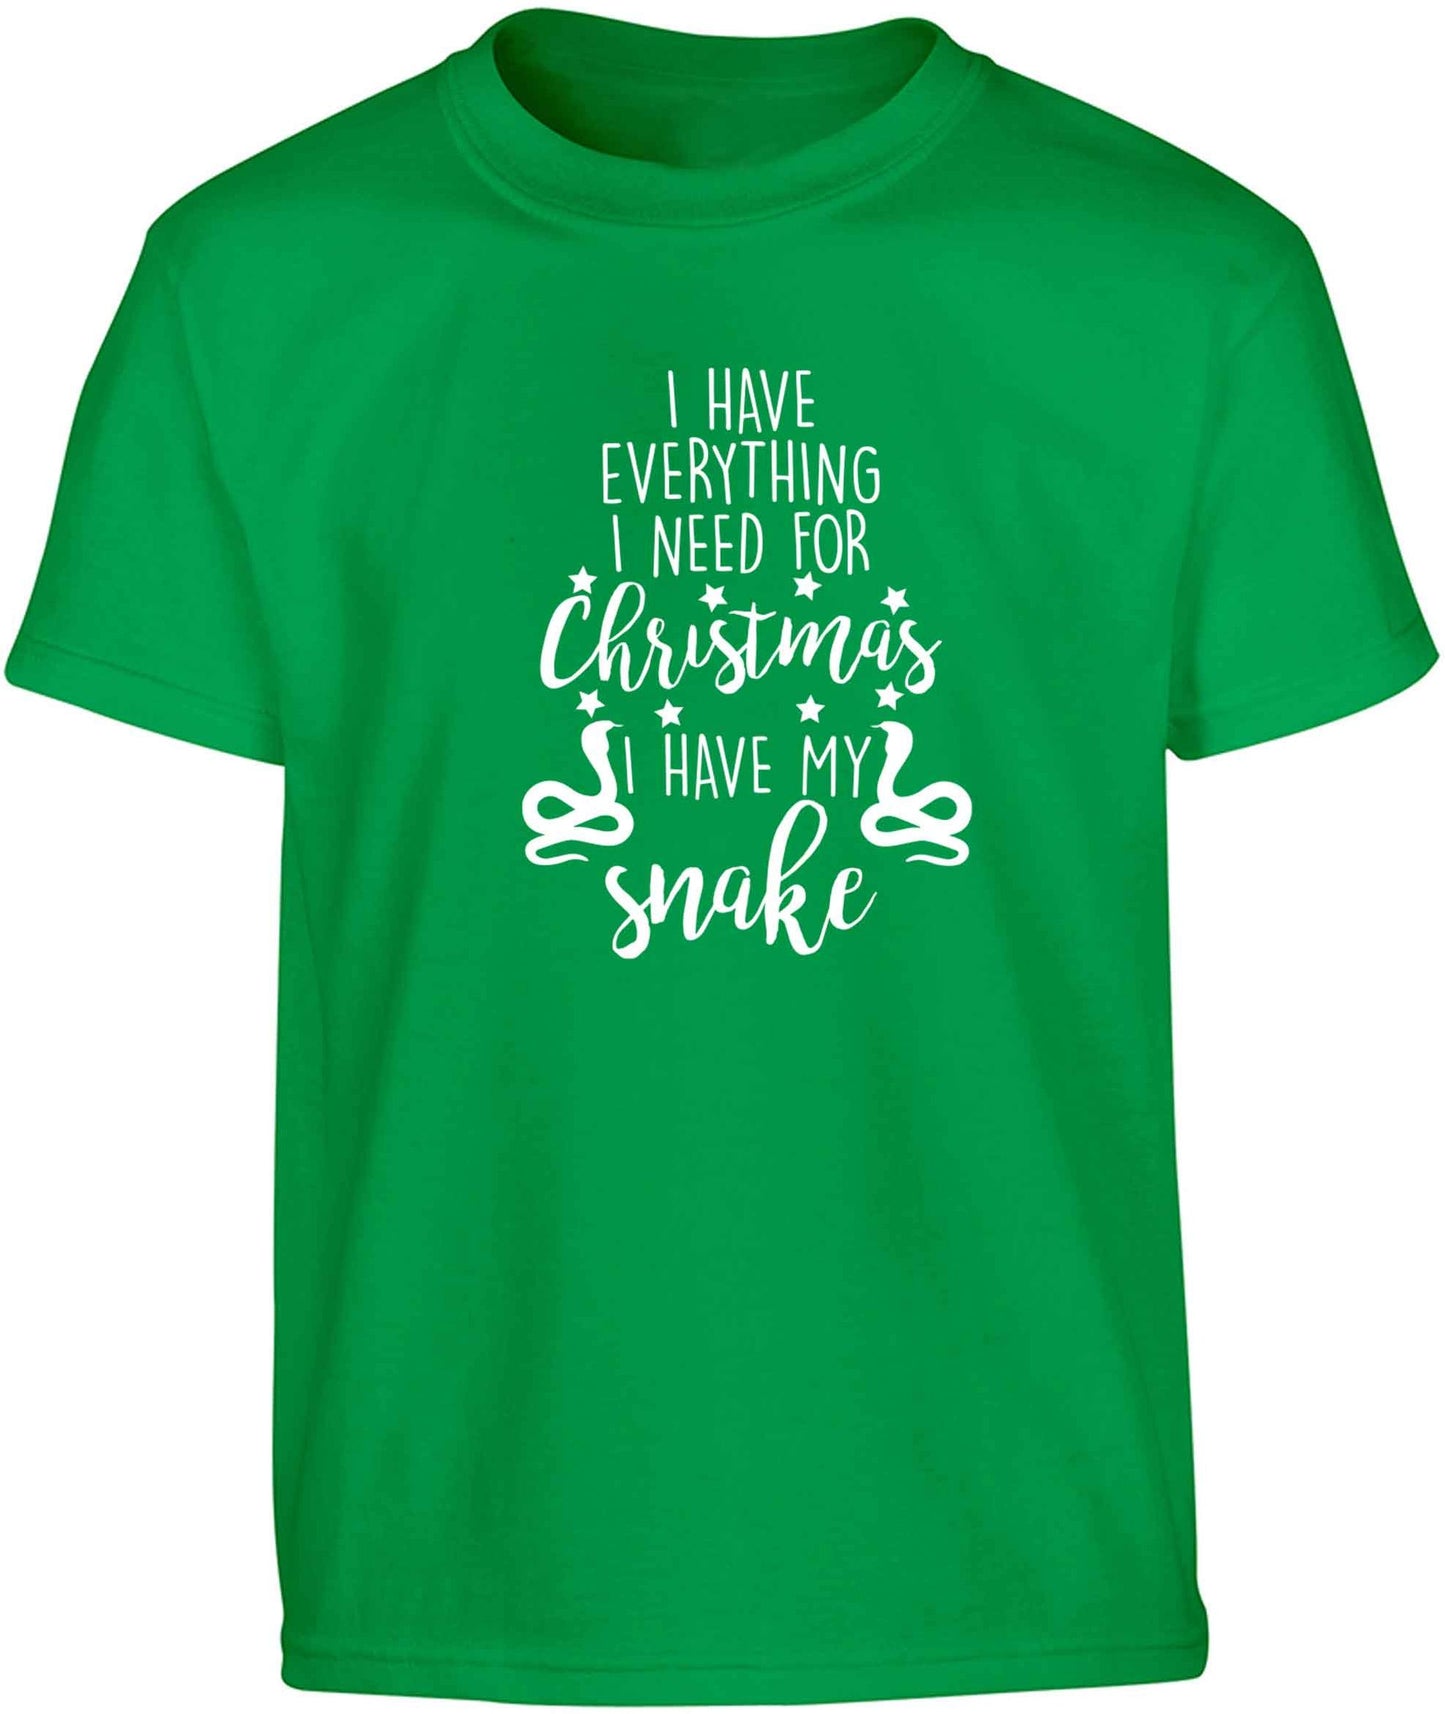 I have everything I need for Christmas I have my snake Children's green Tshirt 12-13 Years